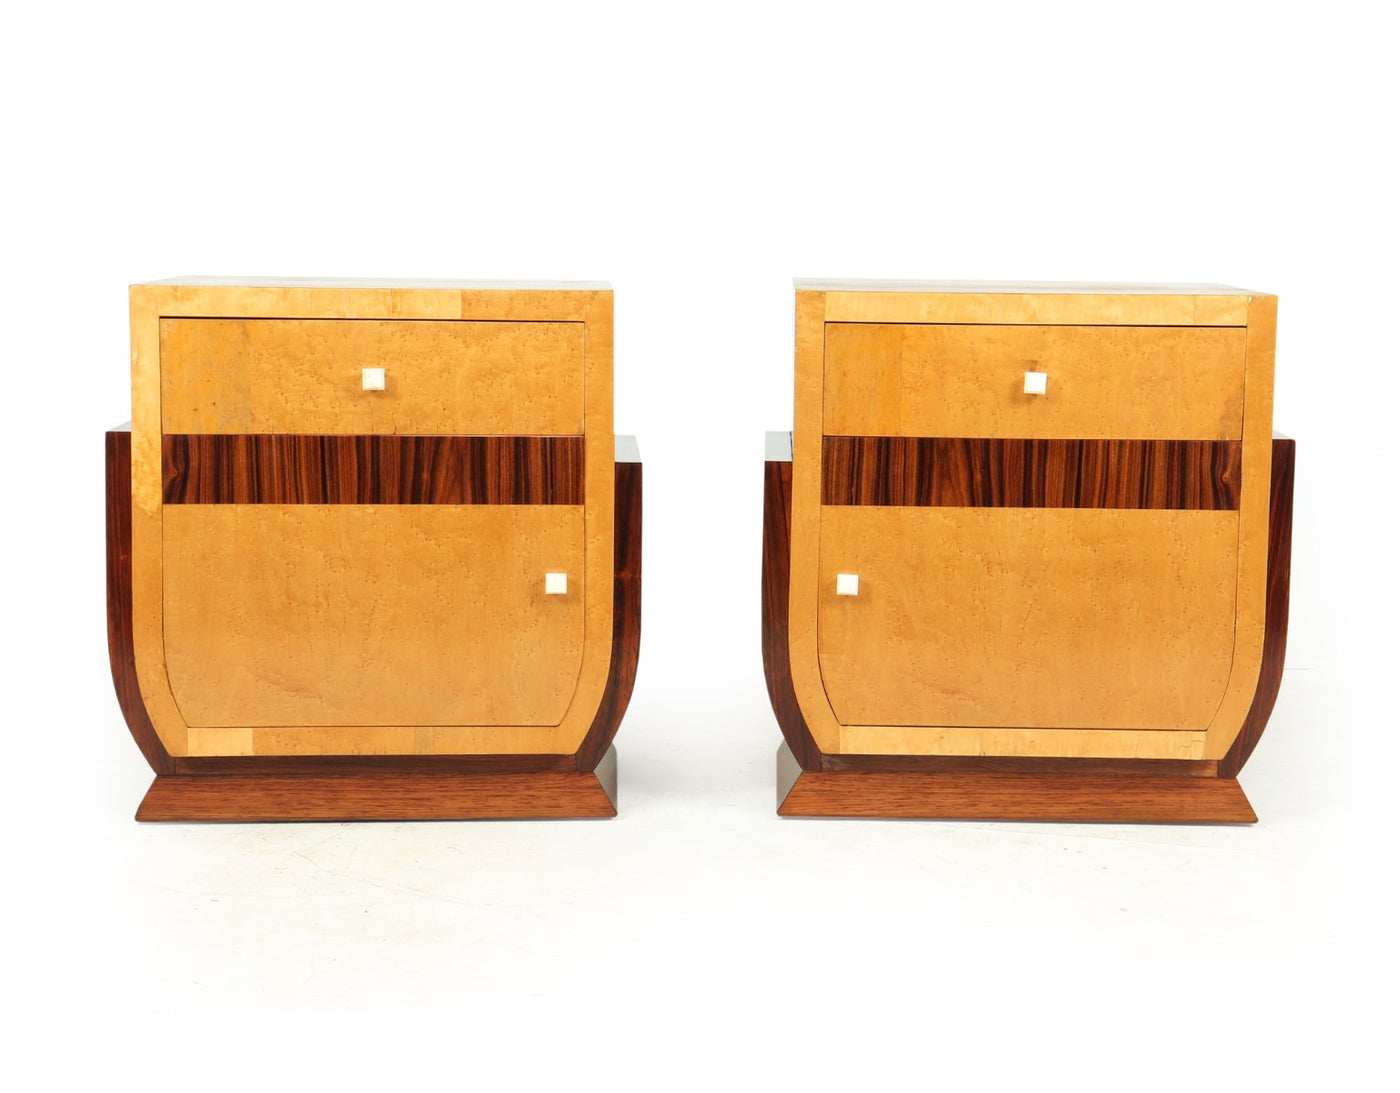 French art Deco Bedside Cabinets c1930